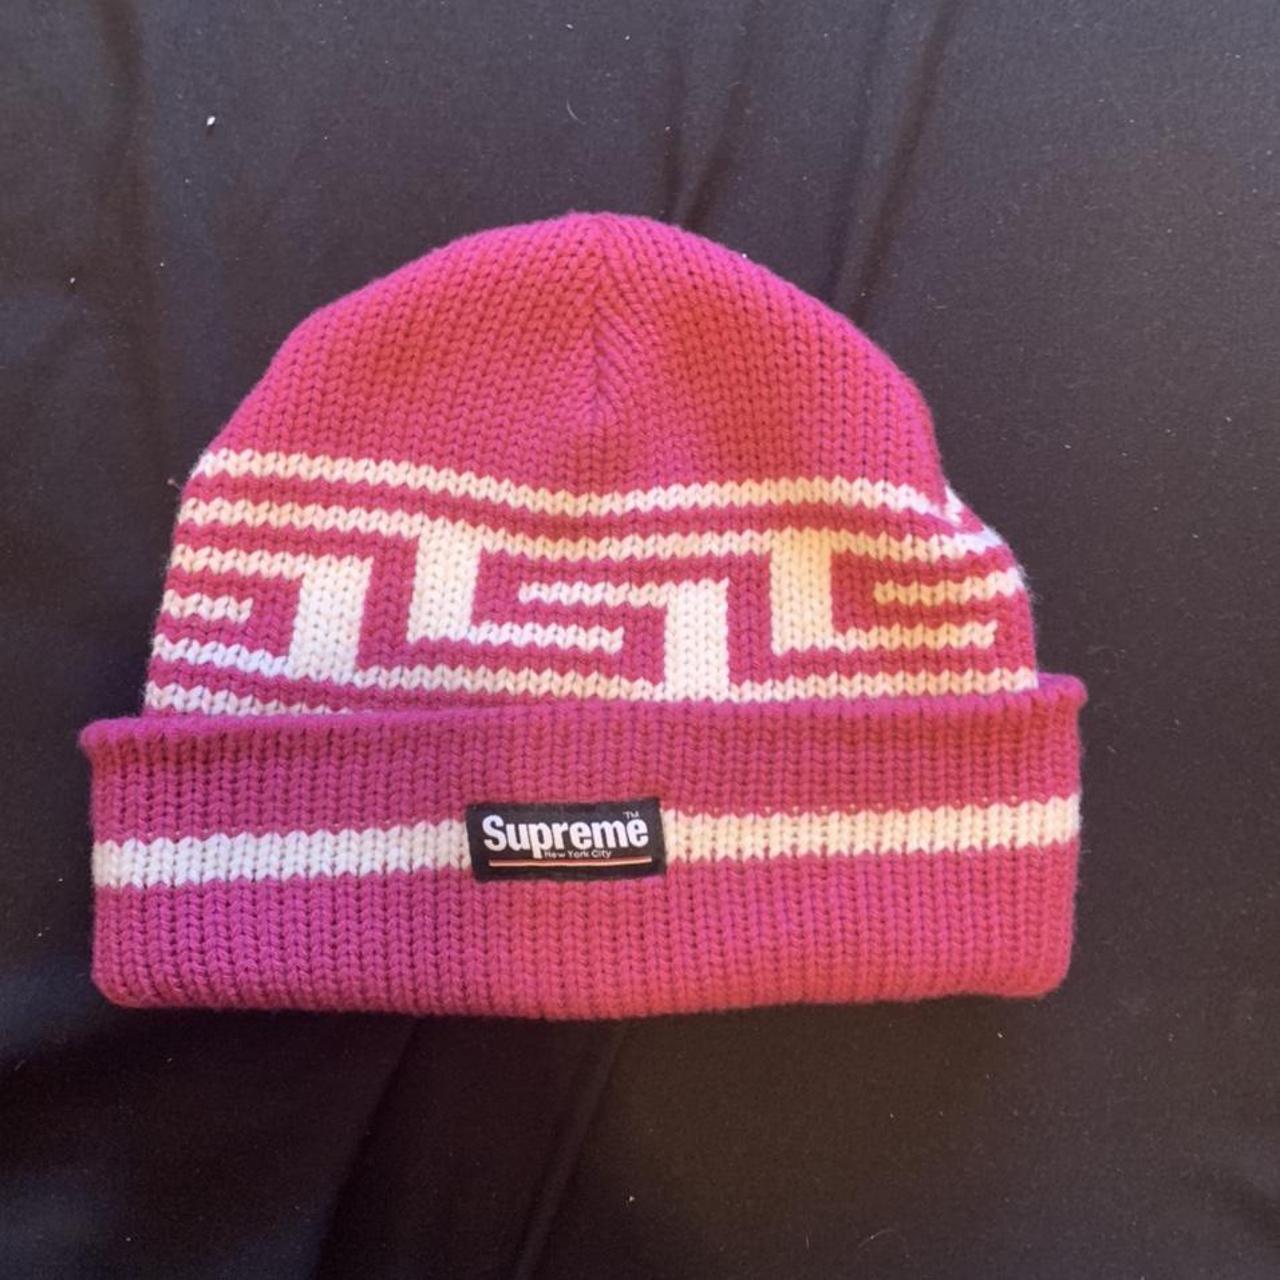 Supreme magnets Meandros Ragg Wool Beanie, From like